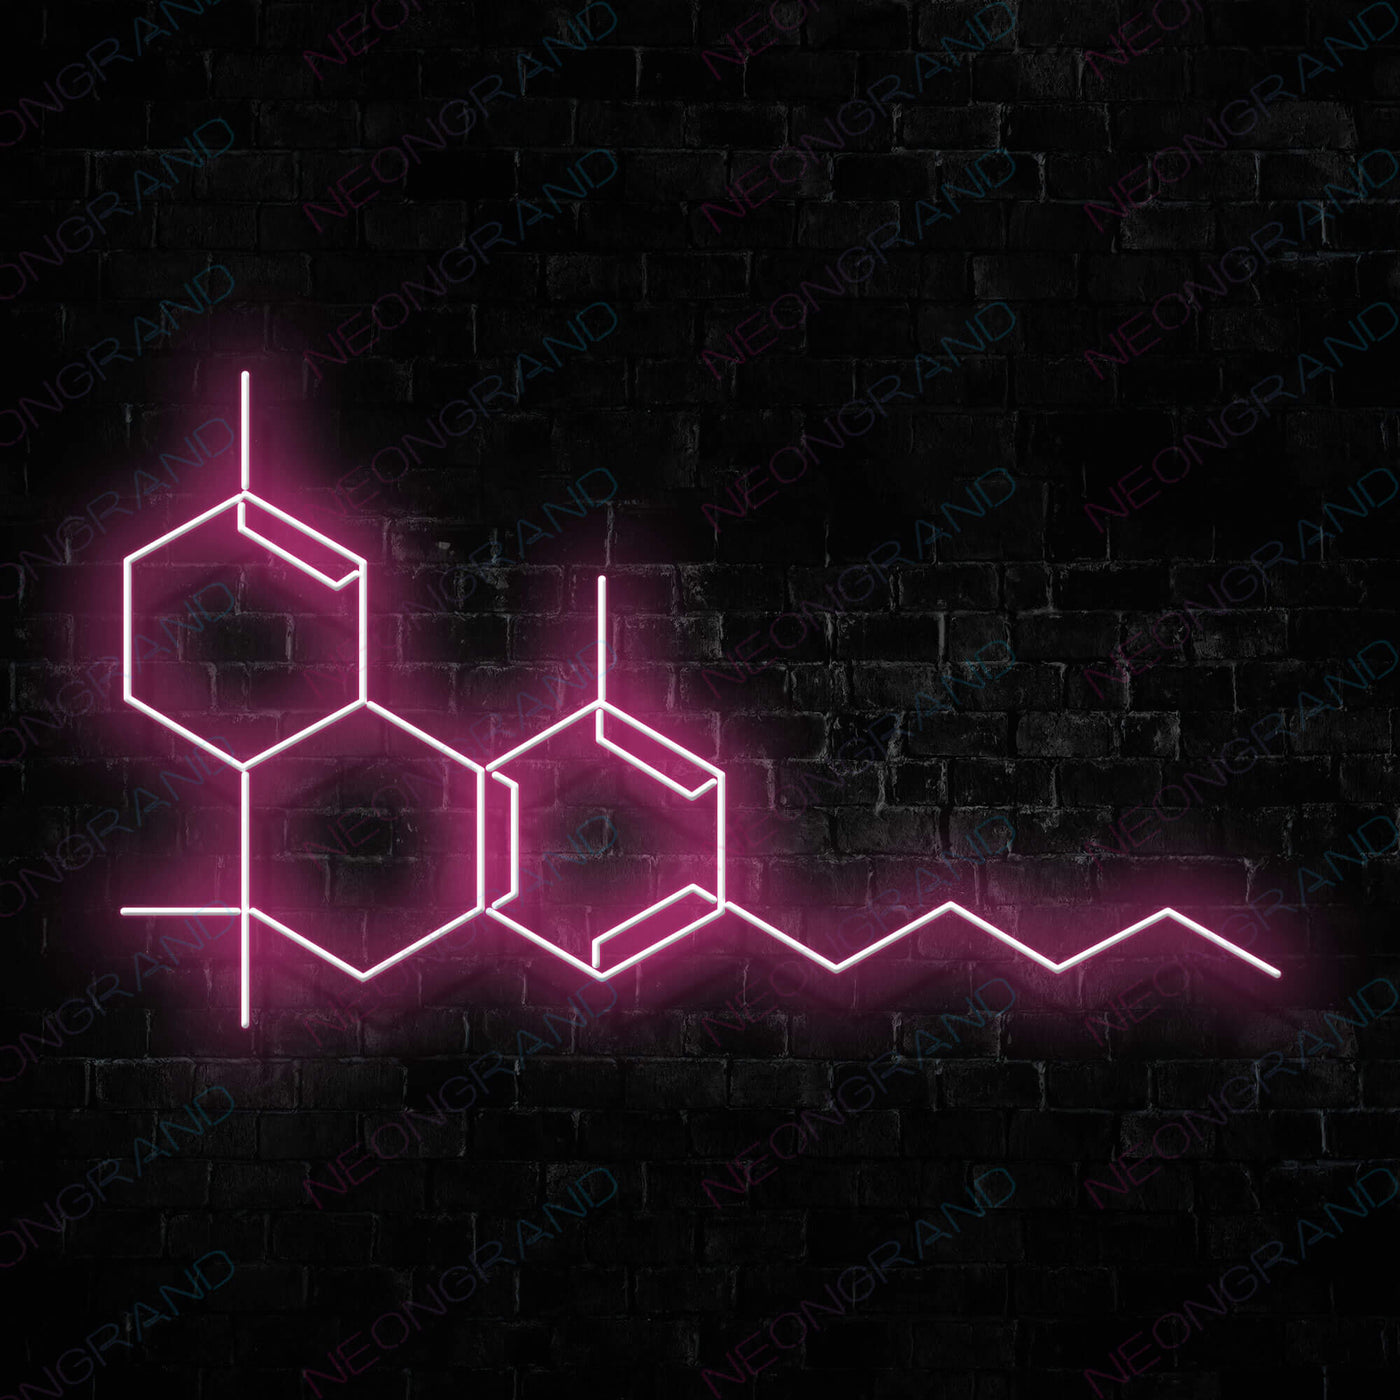 THC Molecule Weed Neon Sign Led Light pink